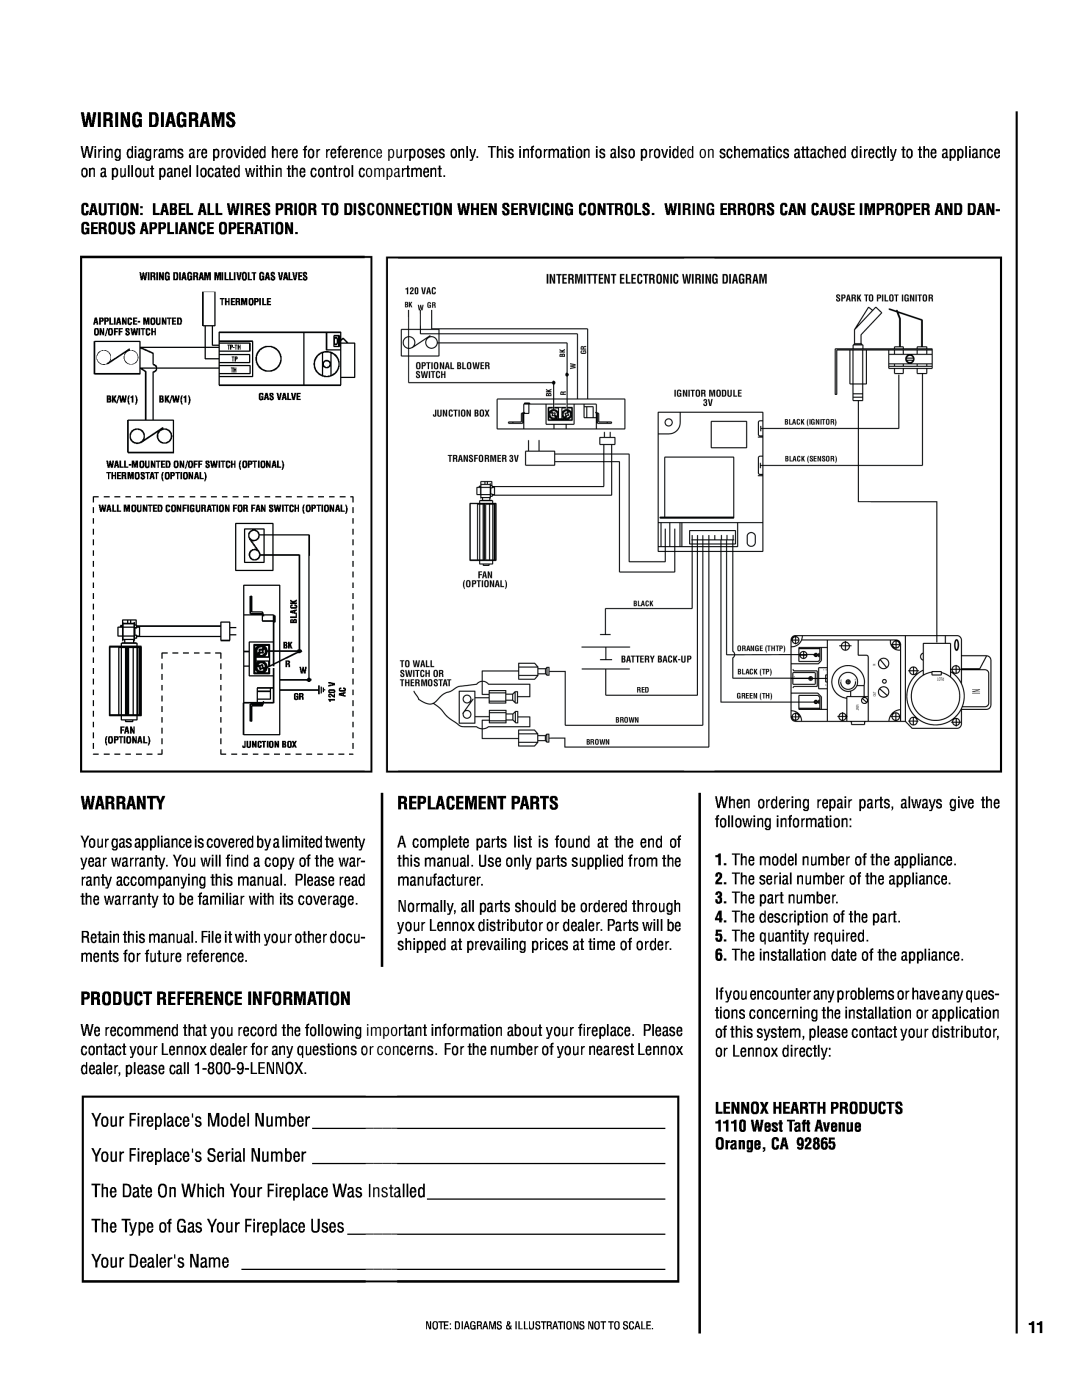 Lennox Hearth MP54-VDLE, MN04-VDLE, MP53-VDLE Wiring Diagrams, Warranty, Replacement parts, Product reference information 